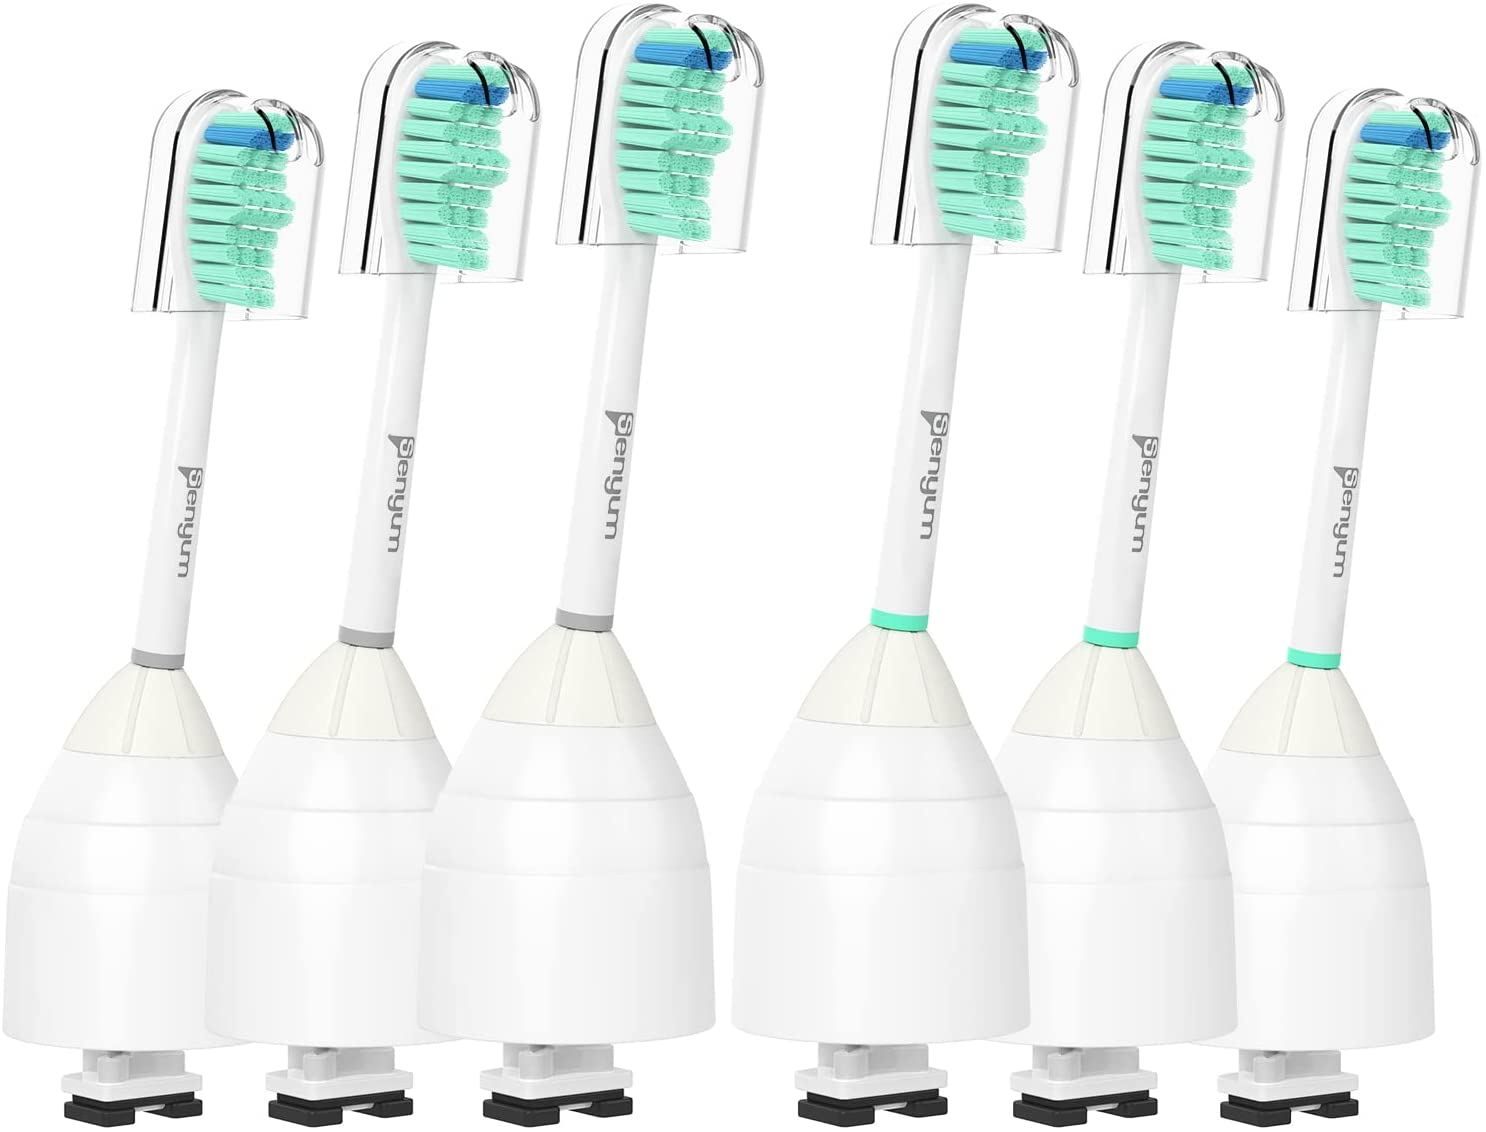 Amazon.com : Senyum Replacement Toothbrush Heads for Philips Sonicare Replacement Heads E-Series $11.79